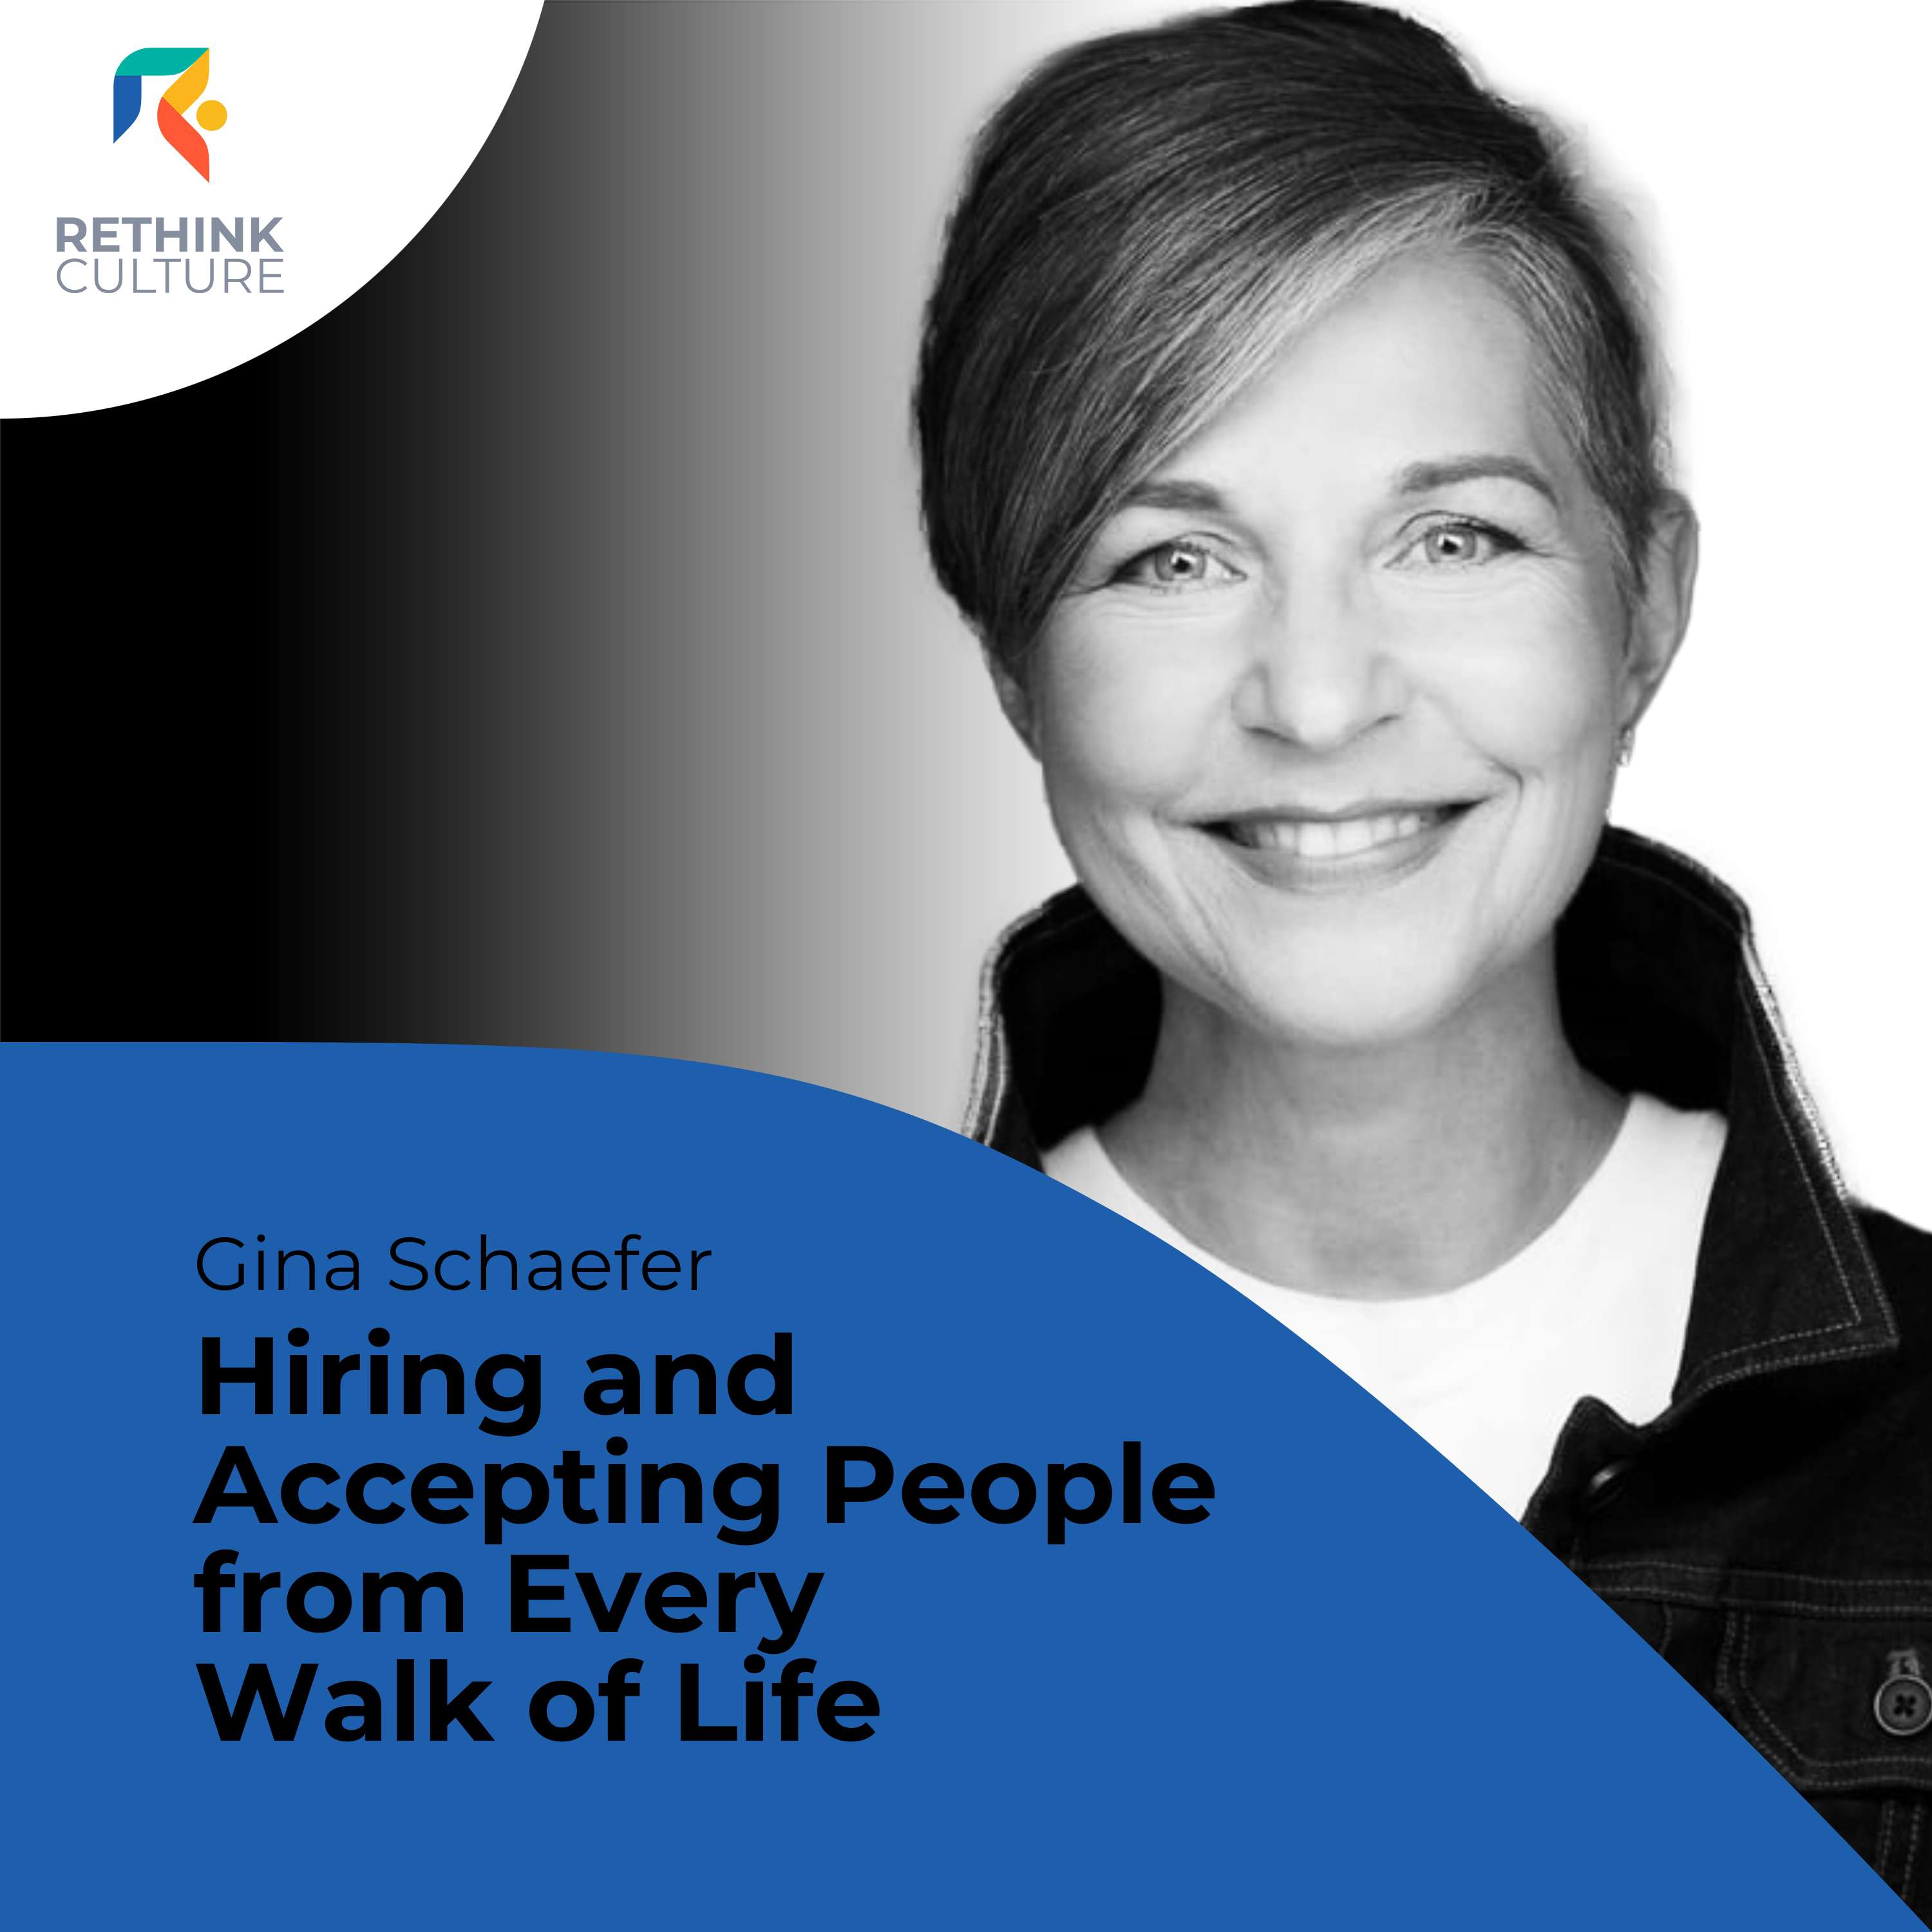 S02E14 Hiring and Accepting People from Every Walk of Life, with Gina Schaefer